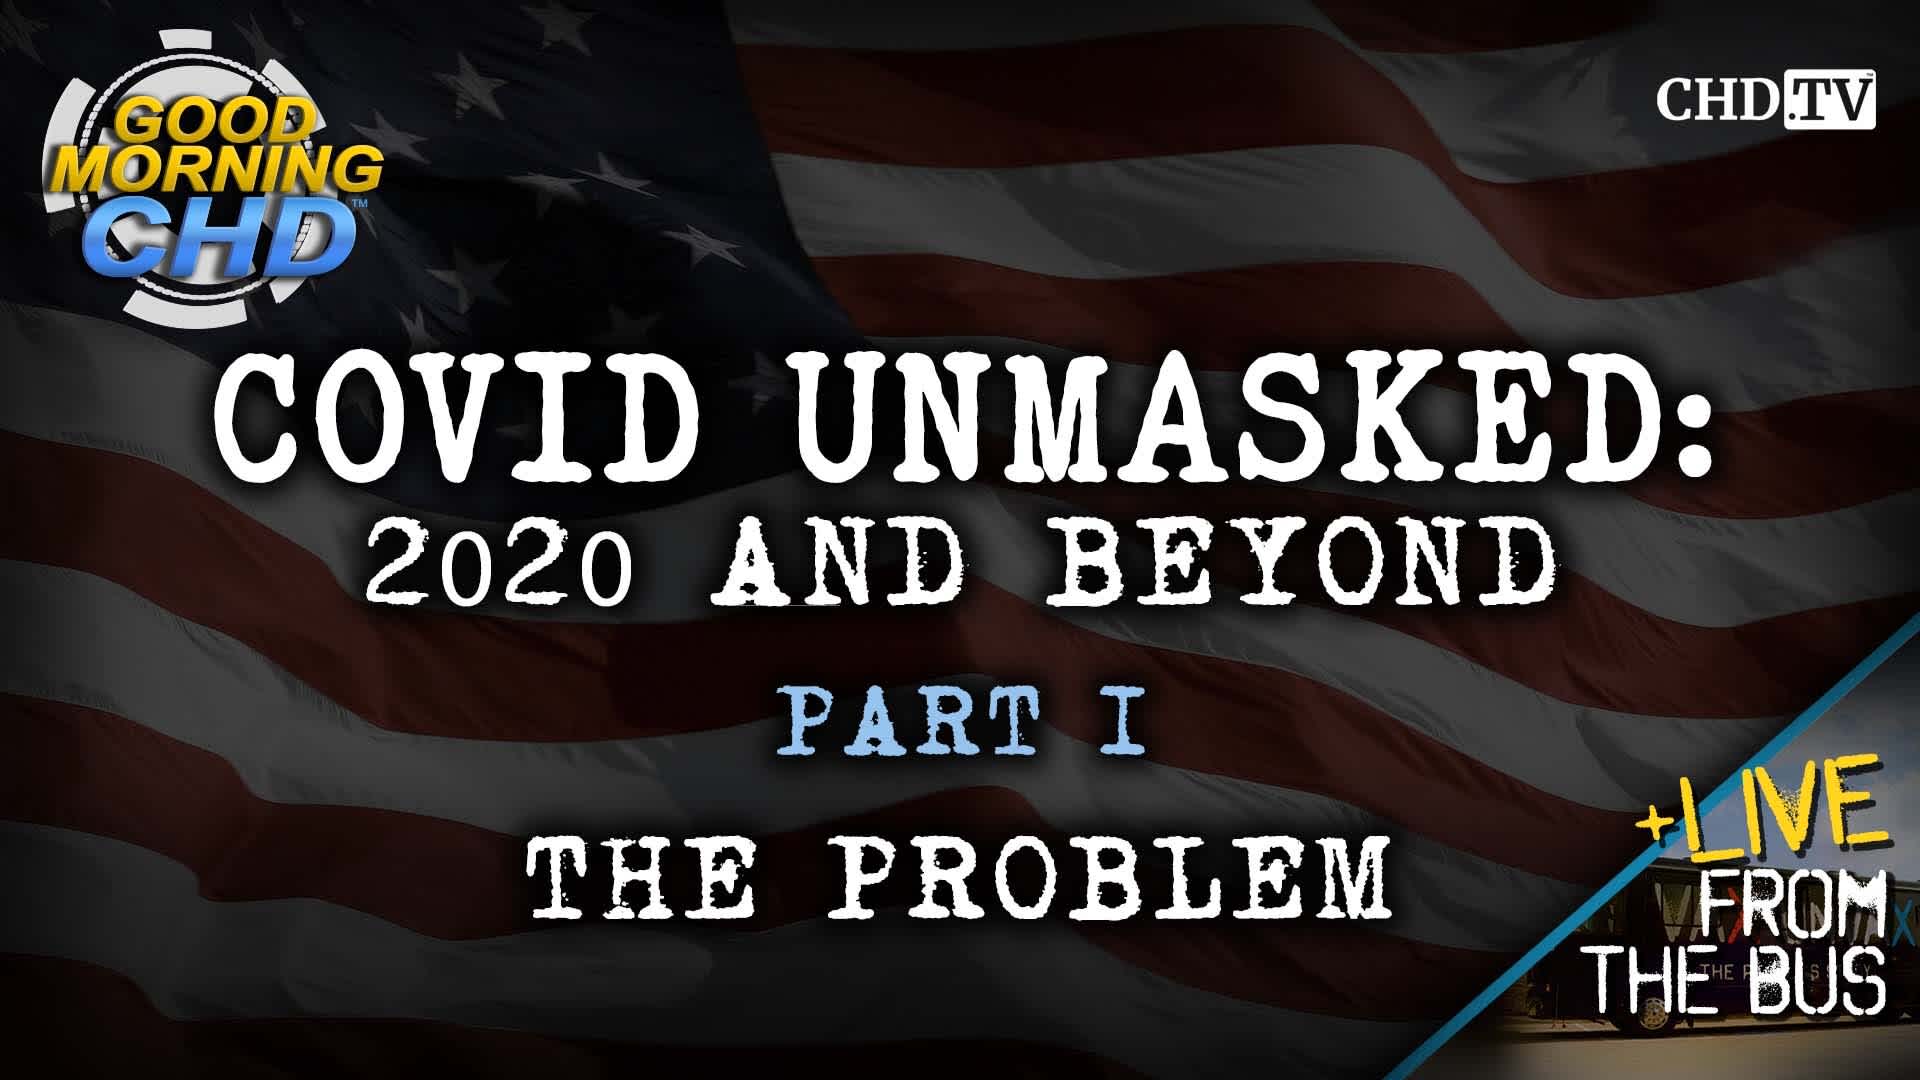 COVID UNMASKED PART 1: THE PROBLEM